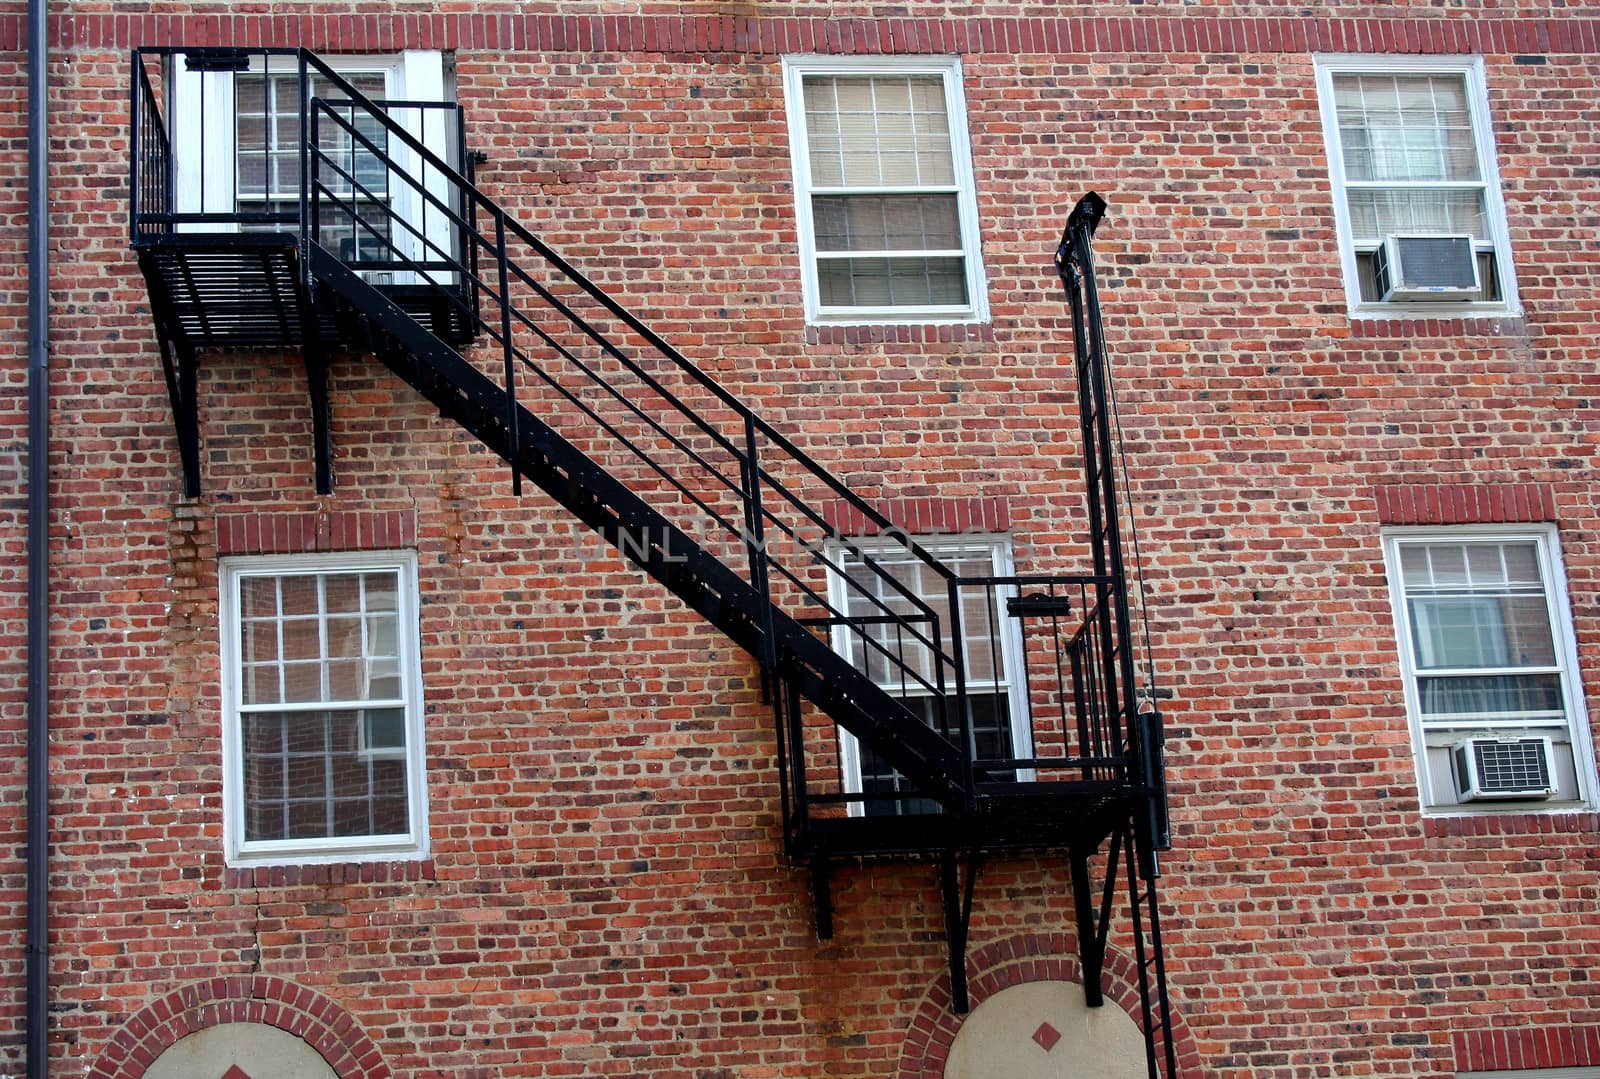 Fire escape on the sife of a building